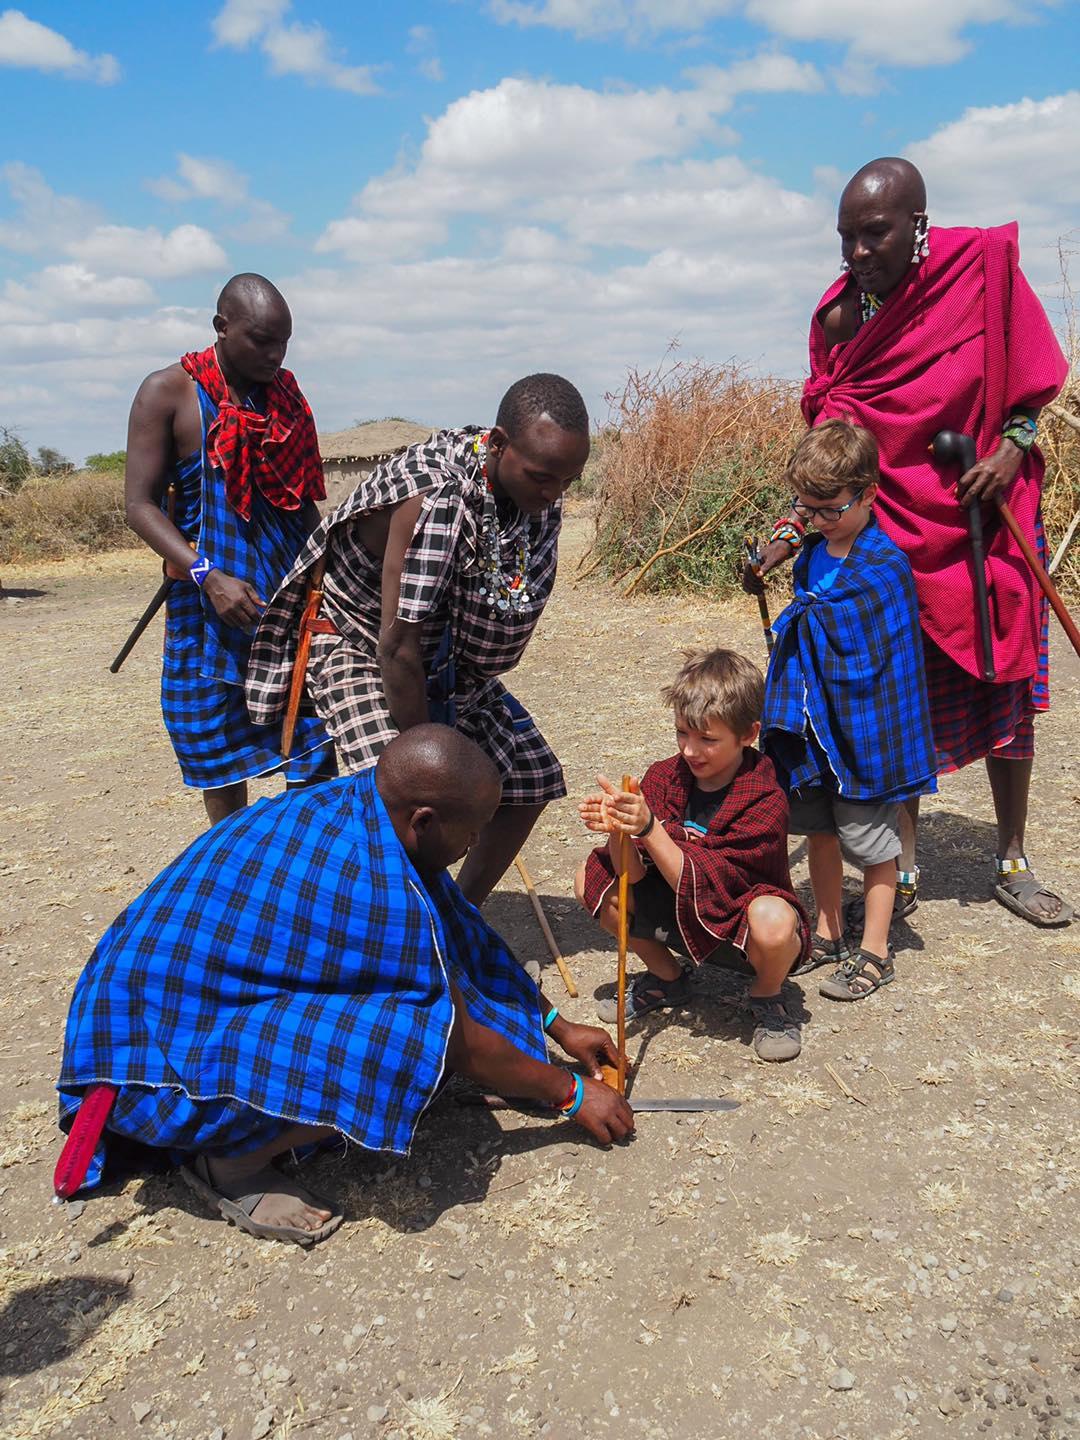 The kids interact with locals in Maasai village, Tanzania. (Courtesy of Edith Lemay)